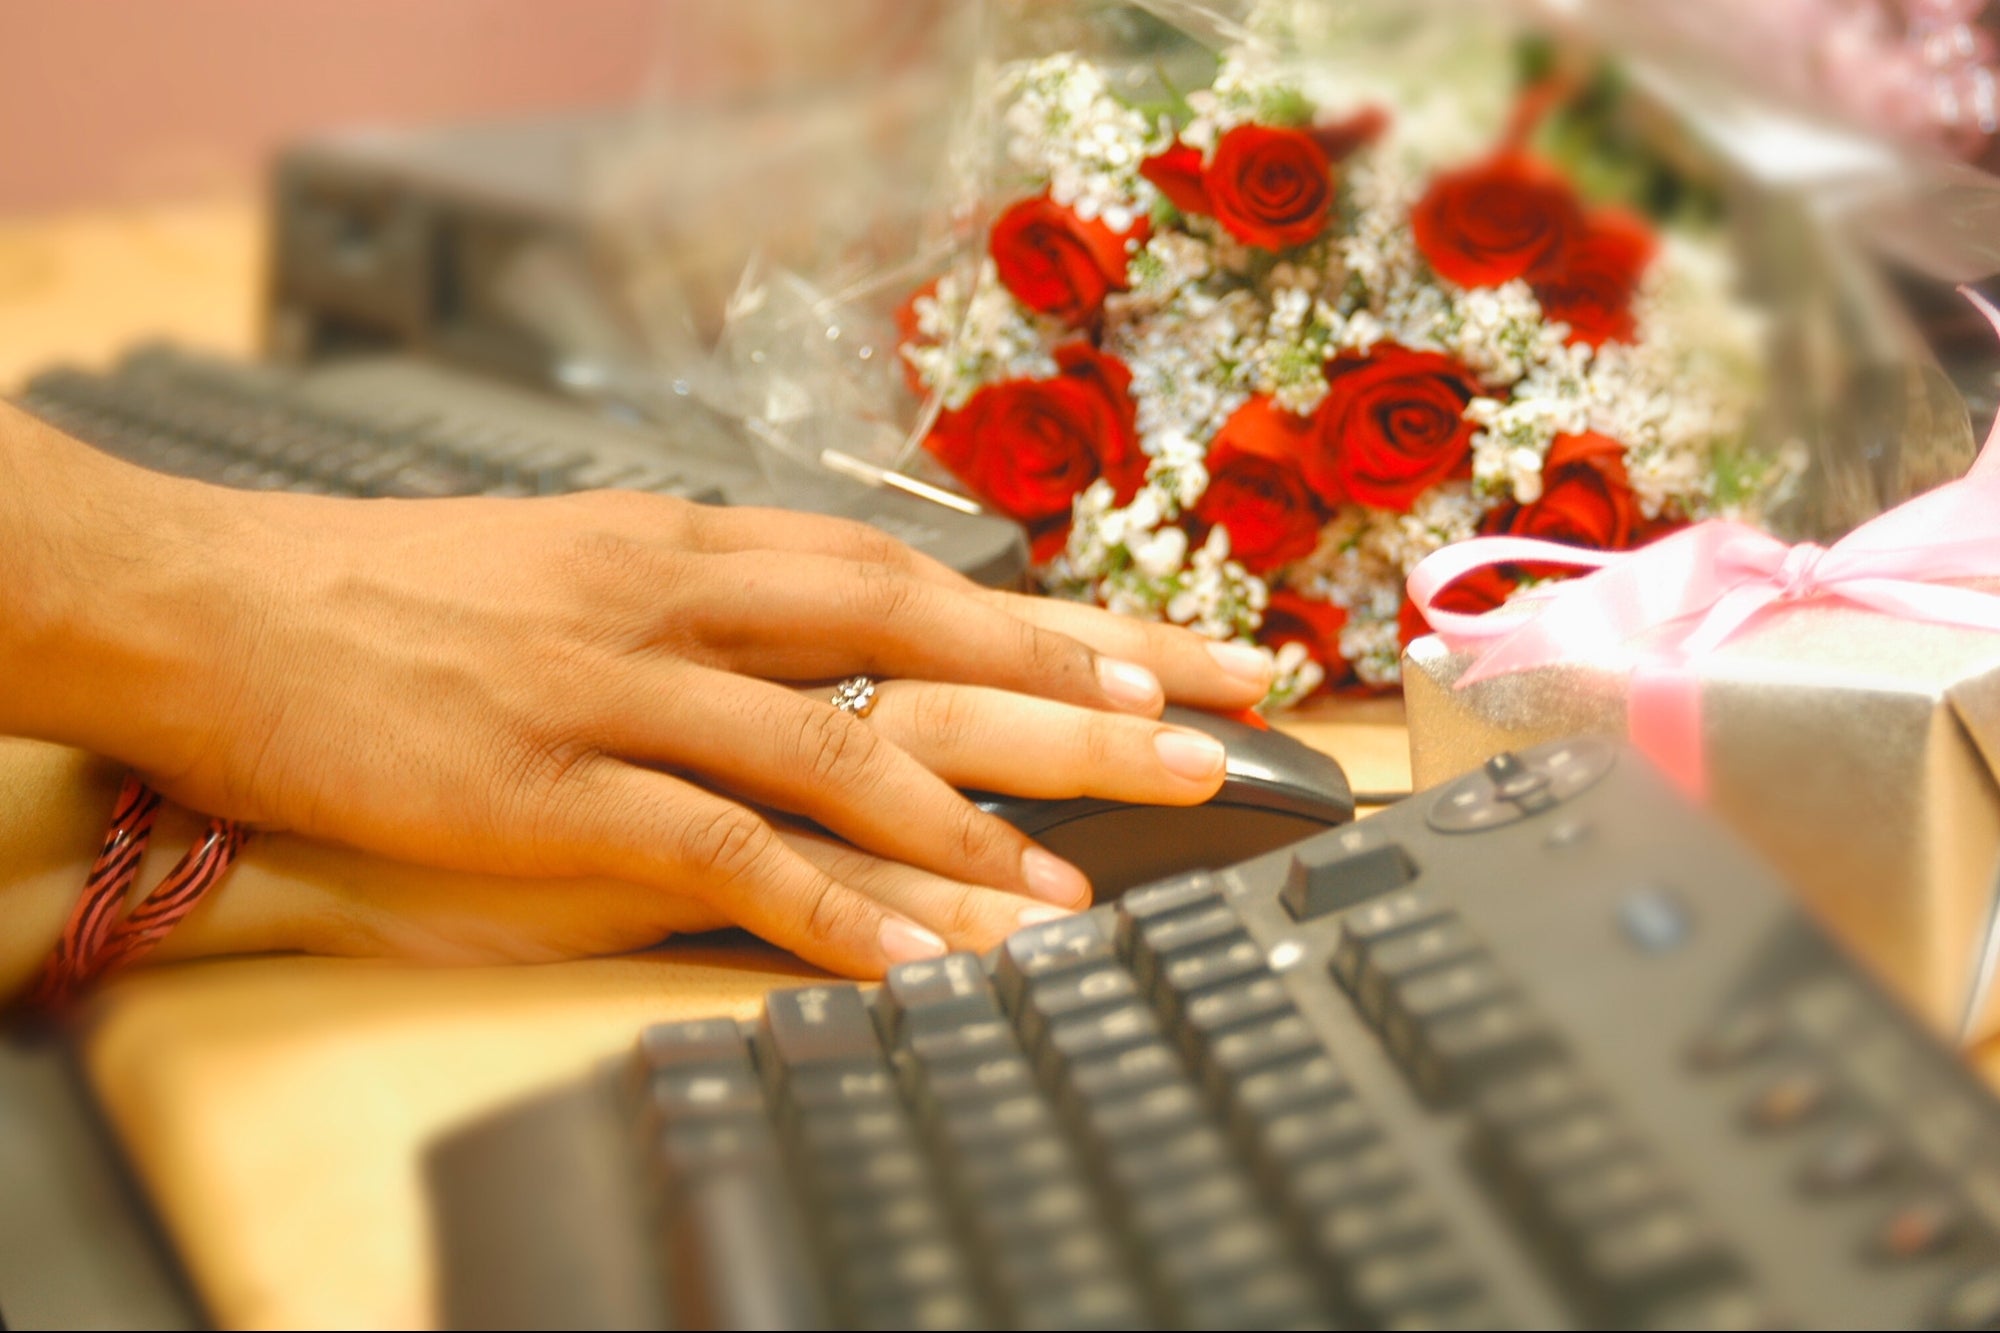 Office Romance Persists, Even Without an Actual Office